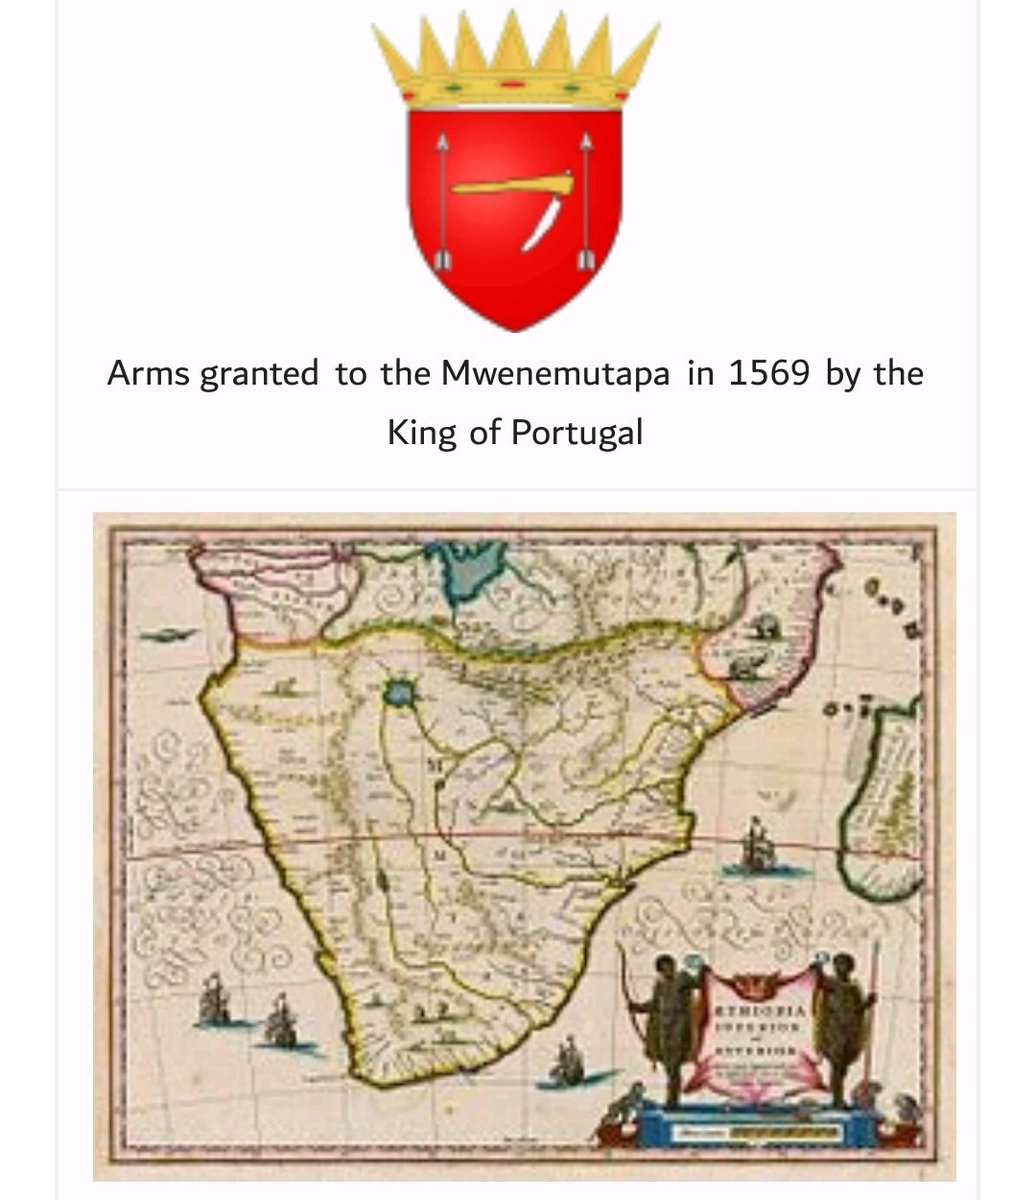 Mutapa empire was at it's peak in the 1480s through to the 1500s when they had a very close relationship with the Portuguese who came to trade. The Portuguese had serious influence on the royal  families of the Mutapa state.